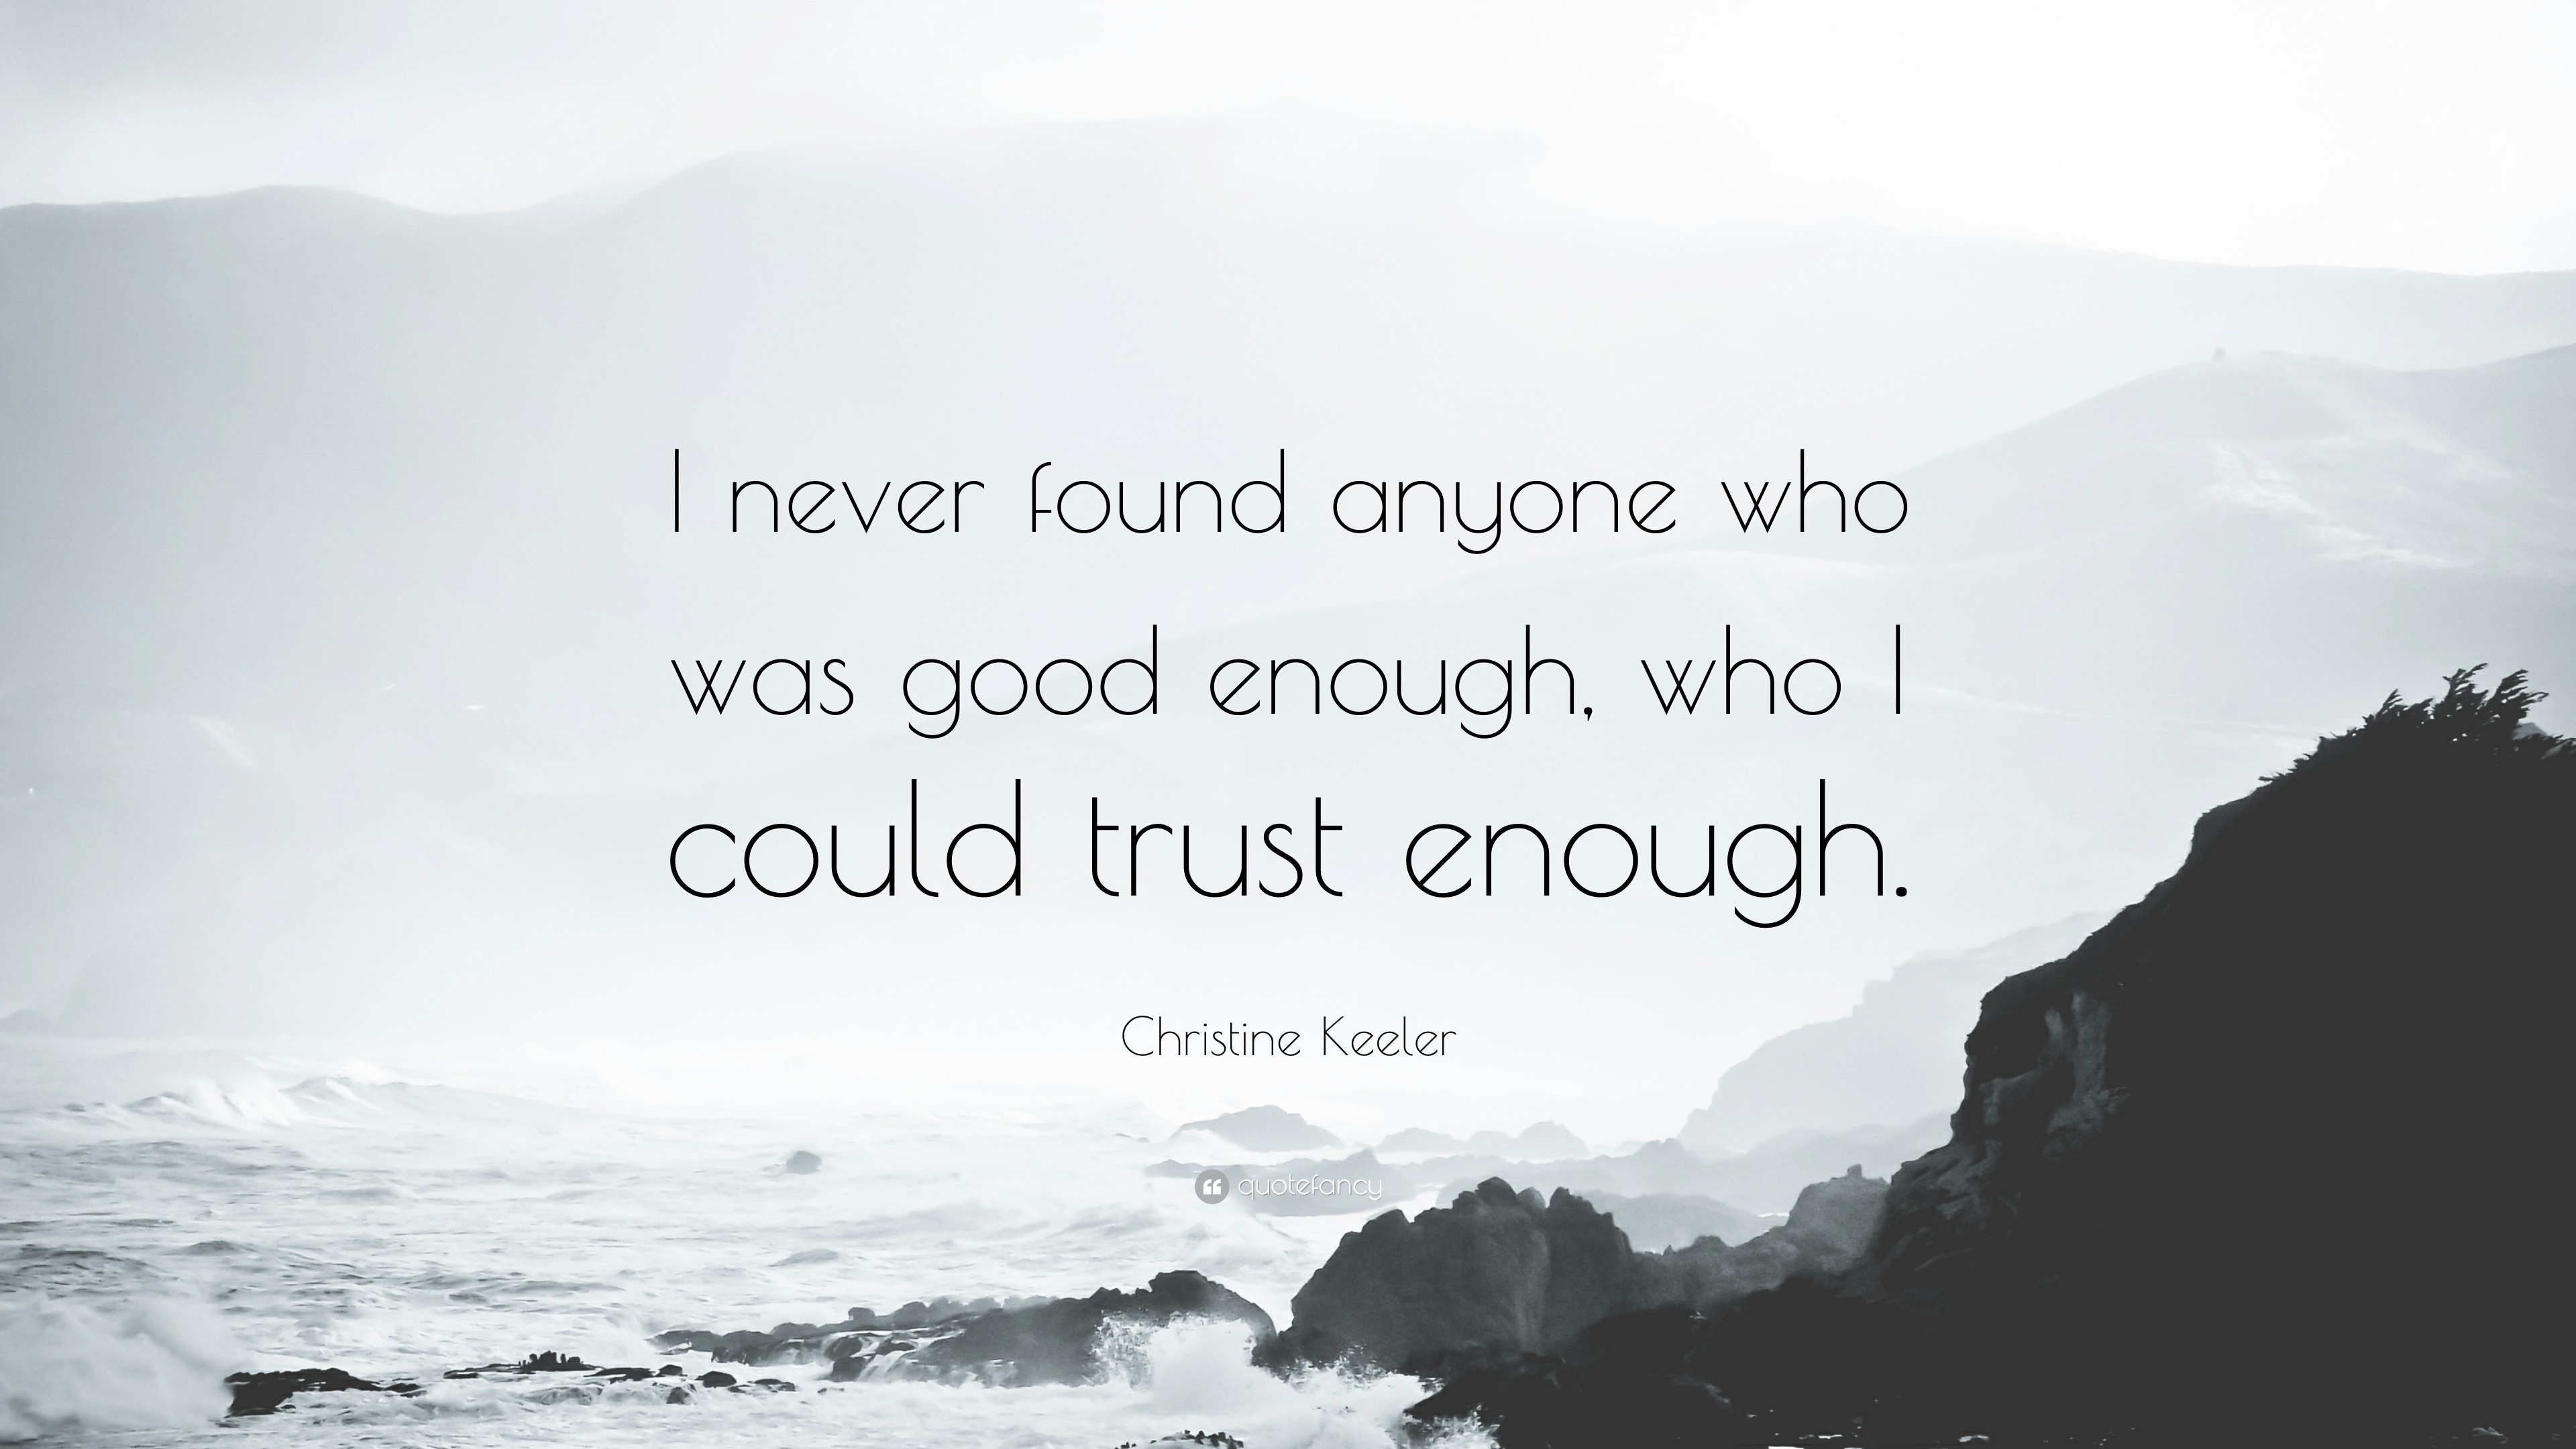 Christine Keeler Quote I Never Found Anyone Who Was Good Enough Who I Could Trust Enough